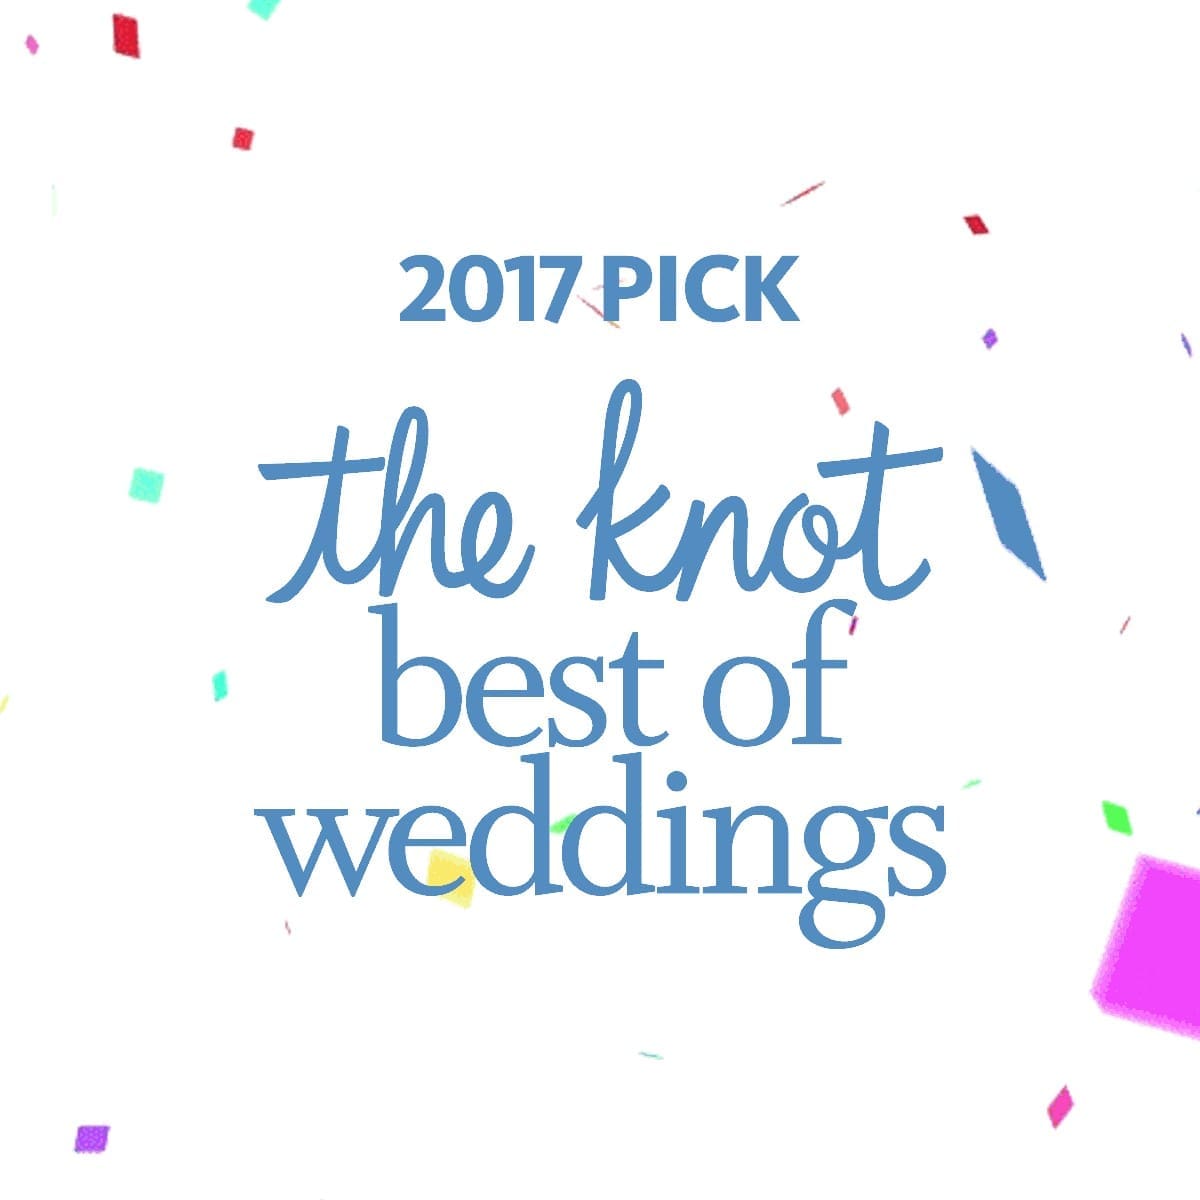 The Results Are In: The Knot “Best of Weddings” Award 2017!!